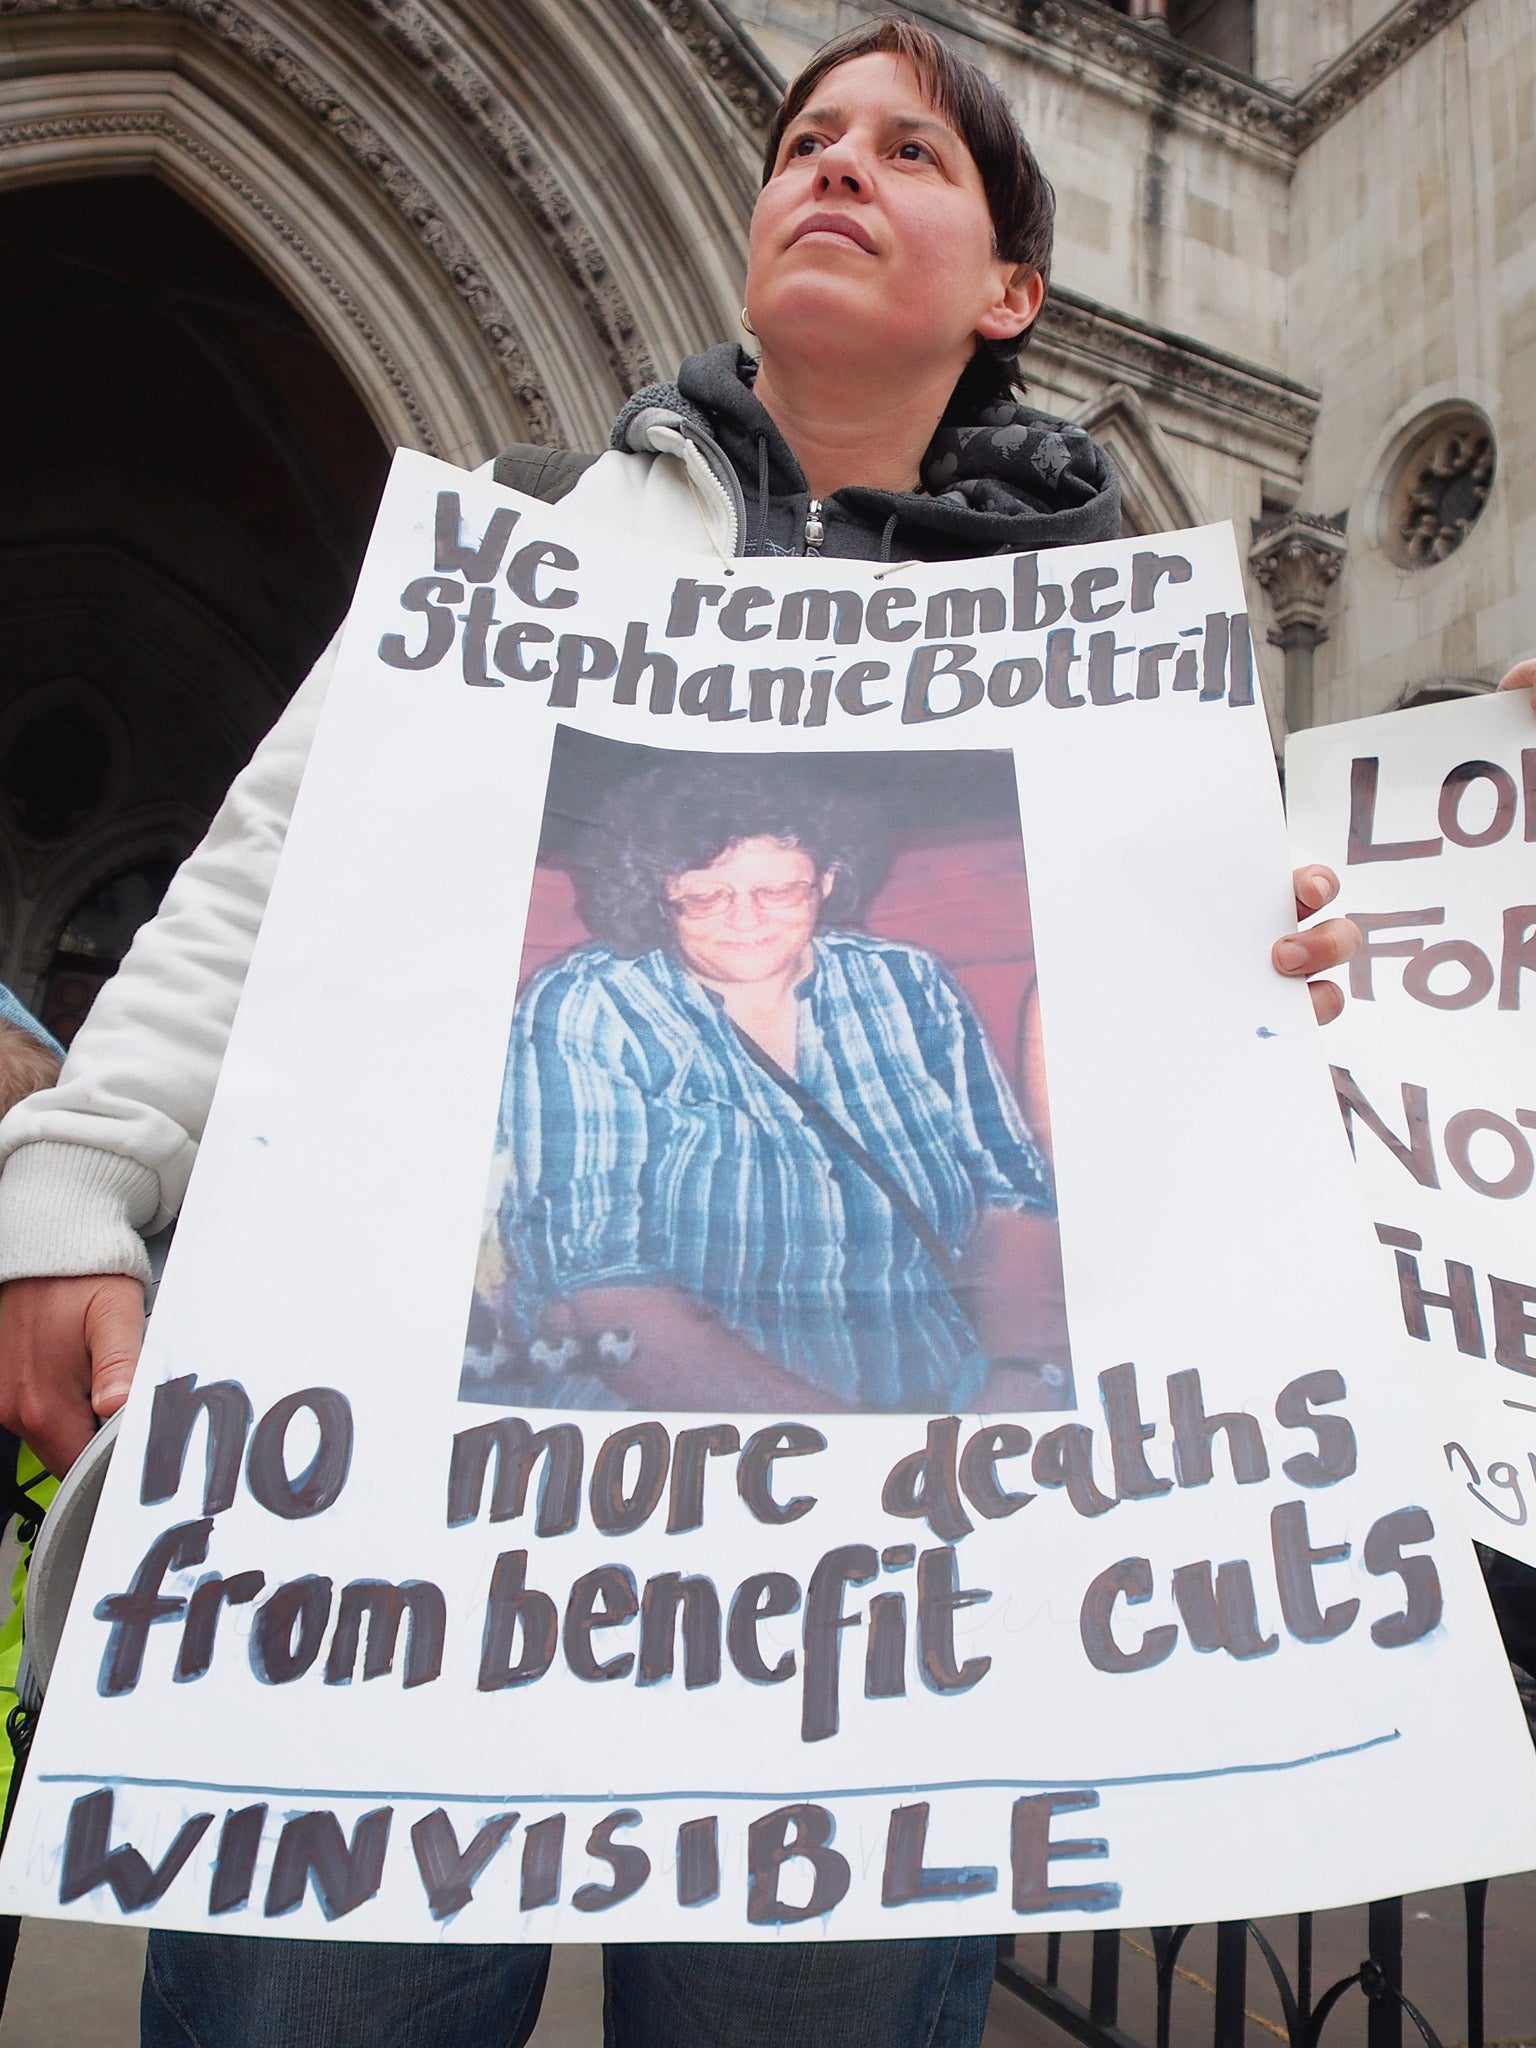 A campaigner at a bedroom tax vigil holds up a placard which reads 'We remember Stephanie Bottrill,' outside the High Court last year